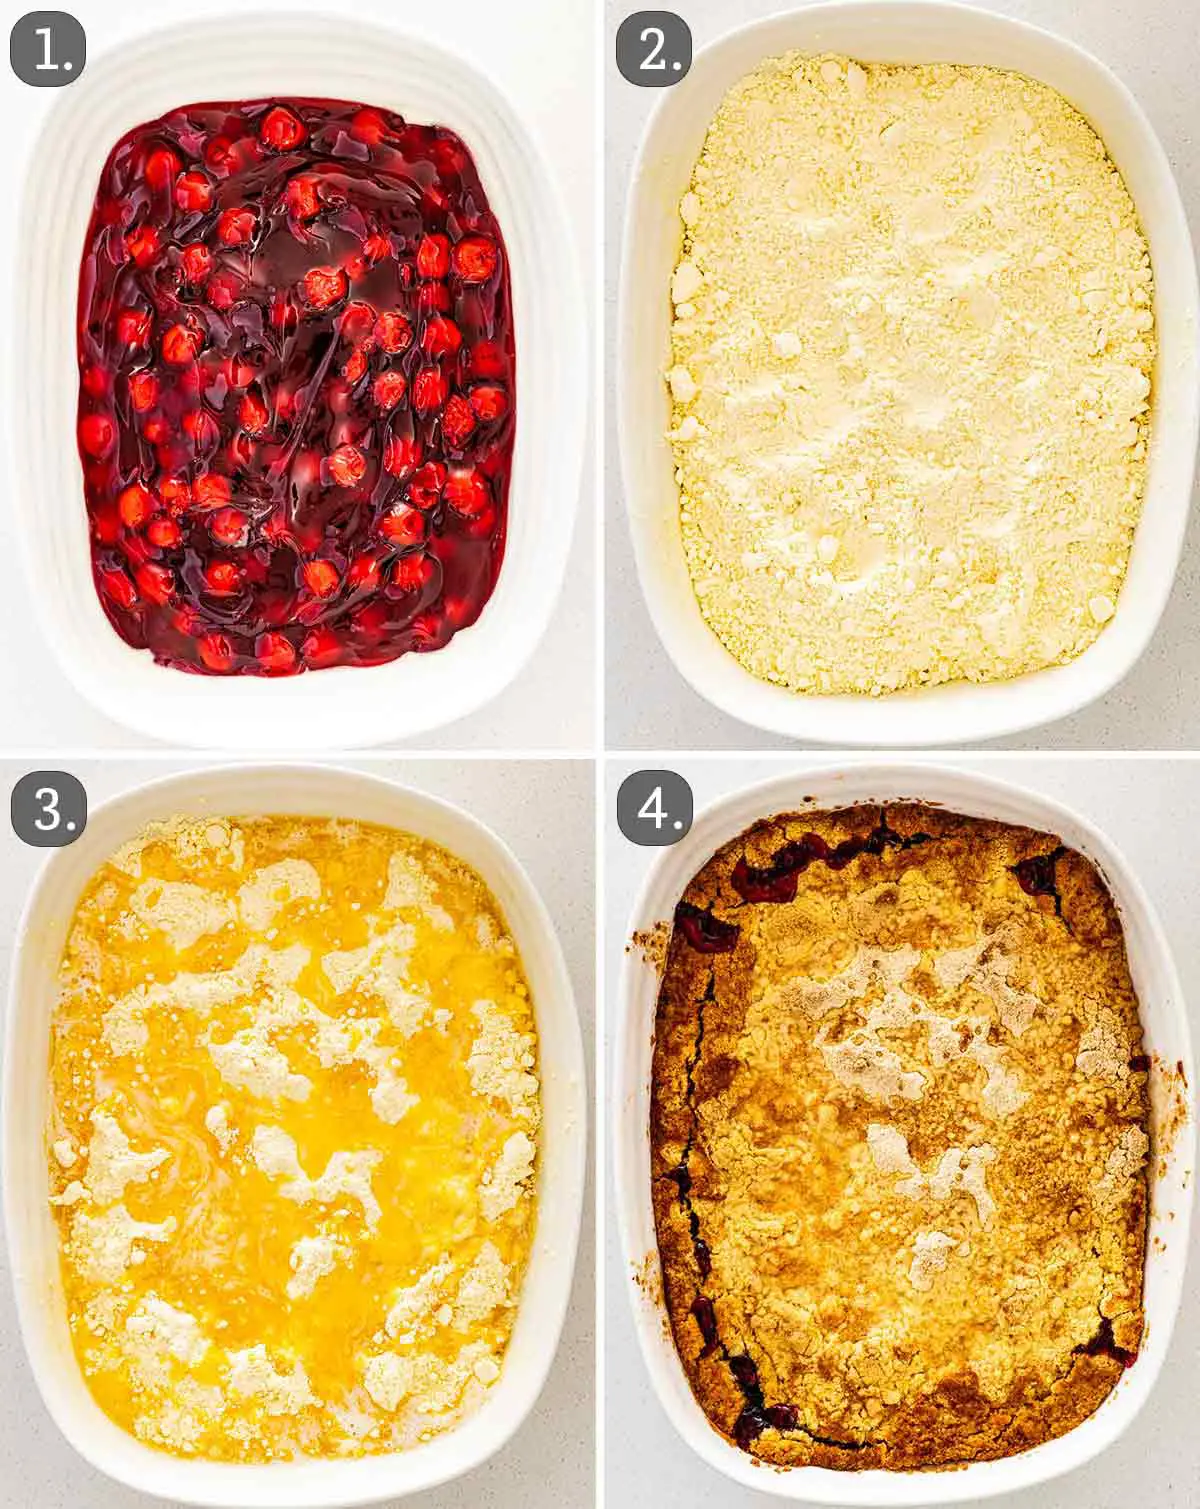 process shots showing how to make cherry dump cake.